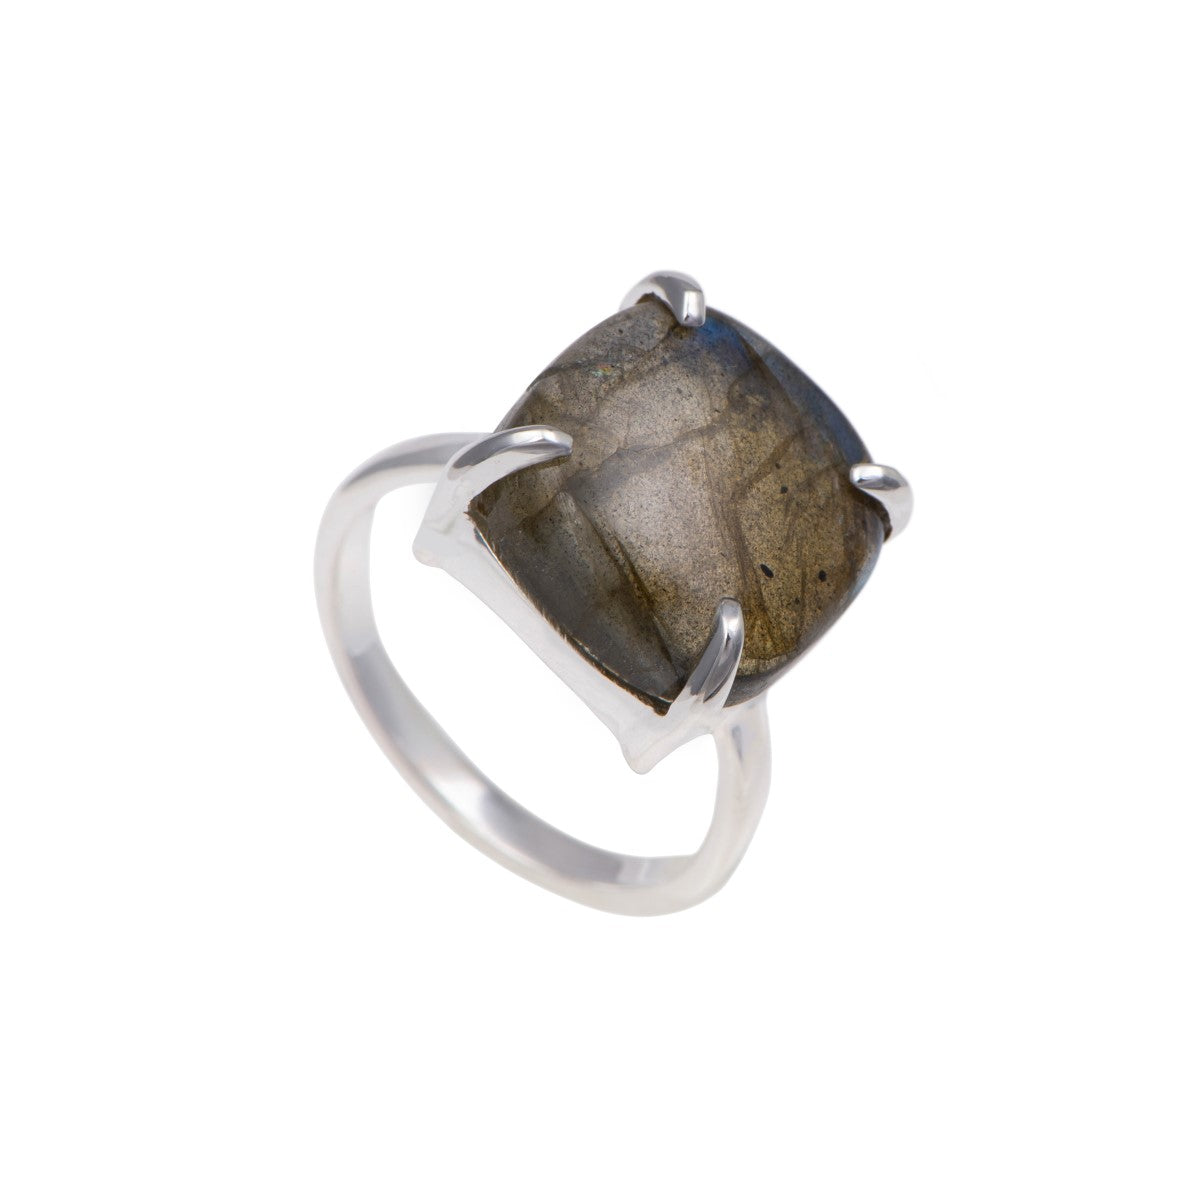 Square Cabochon Labradorite Ring in Sterling Silver